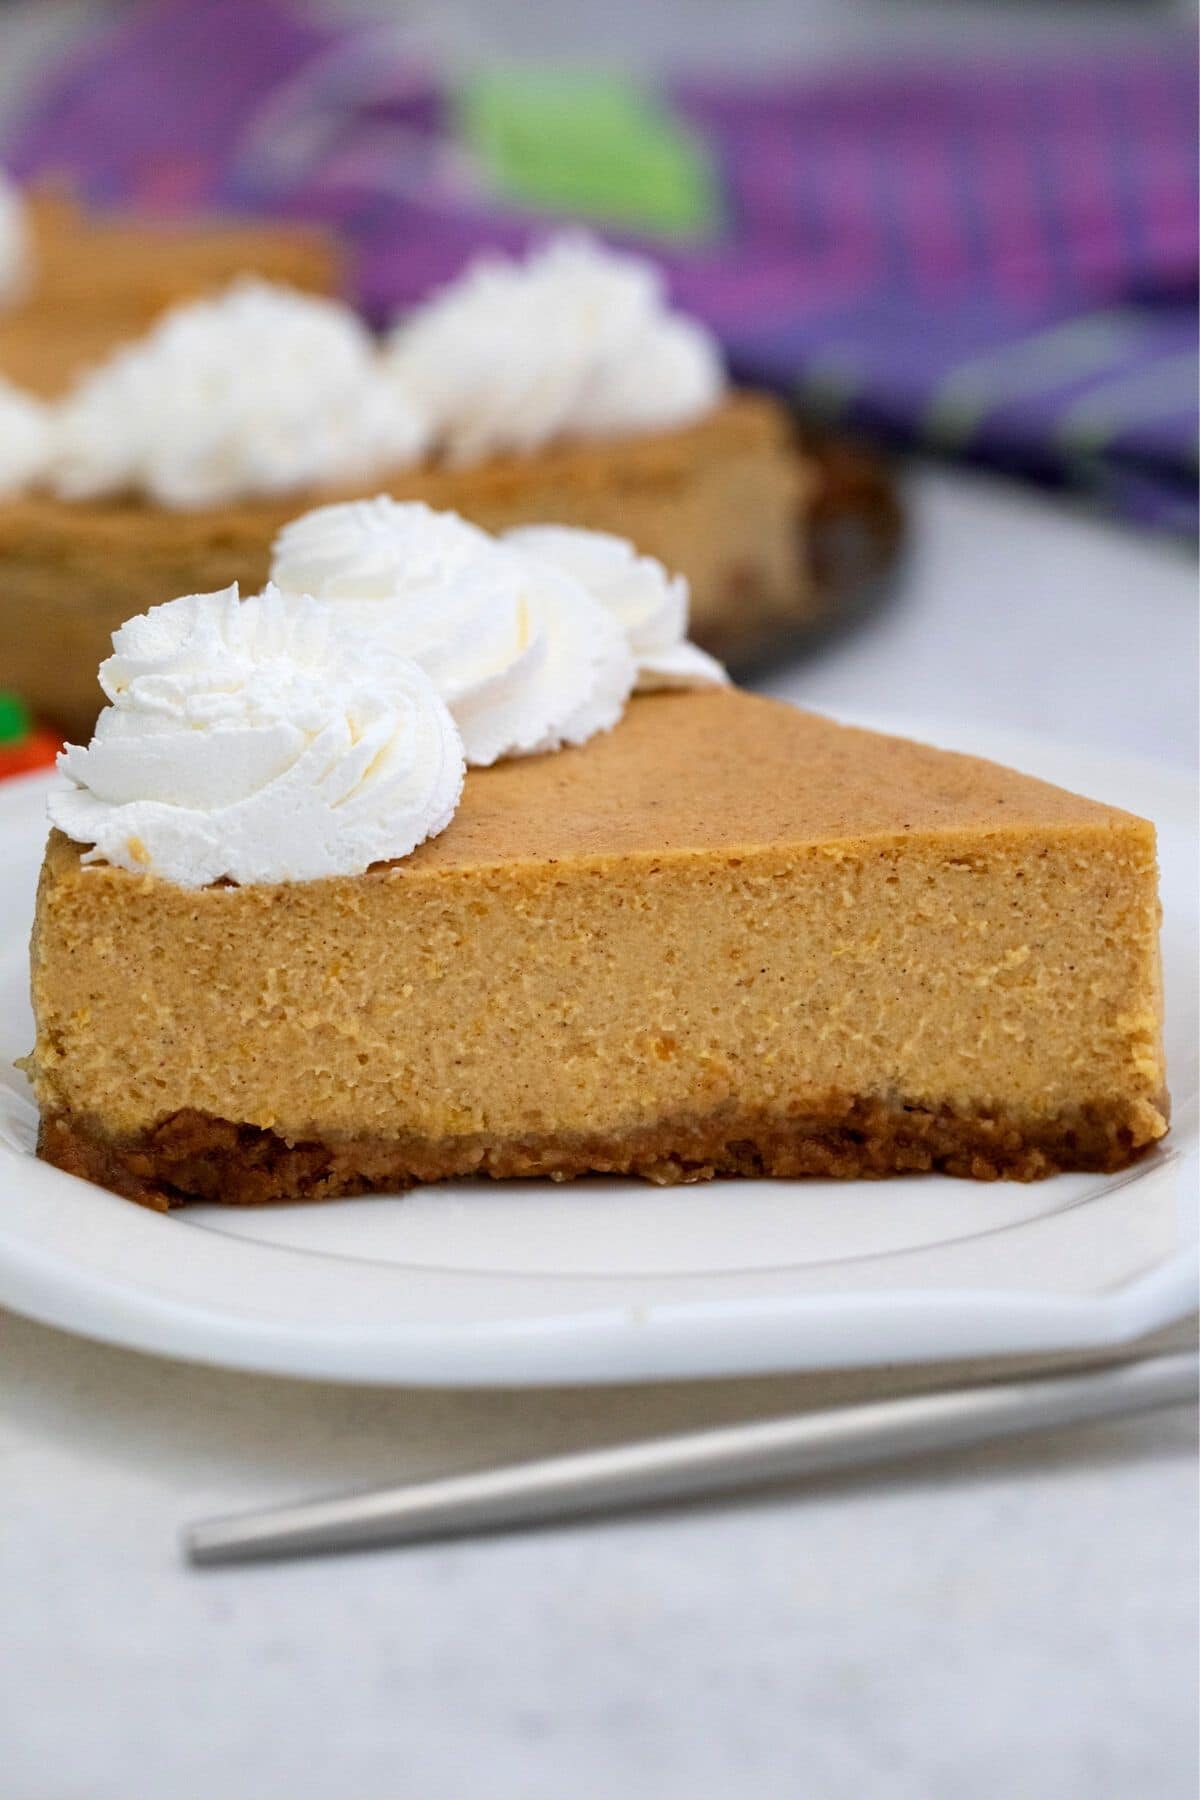 Side slice of pumpkin cheesecake on white plate by fork